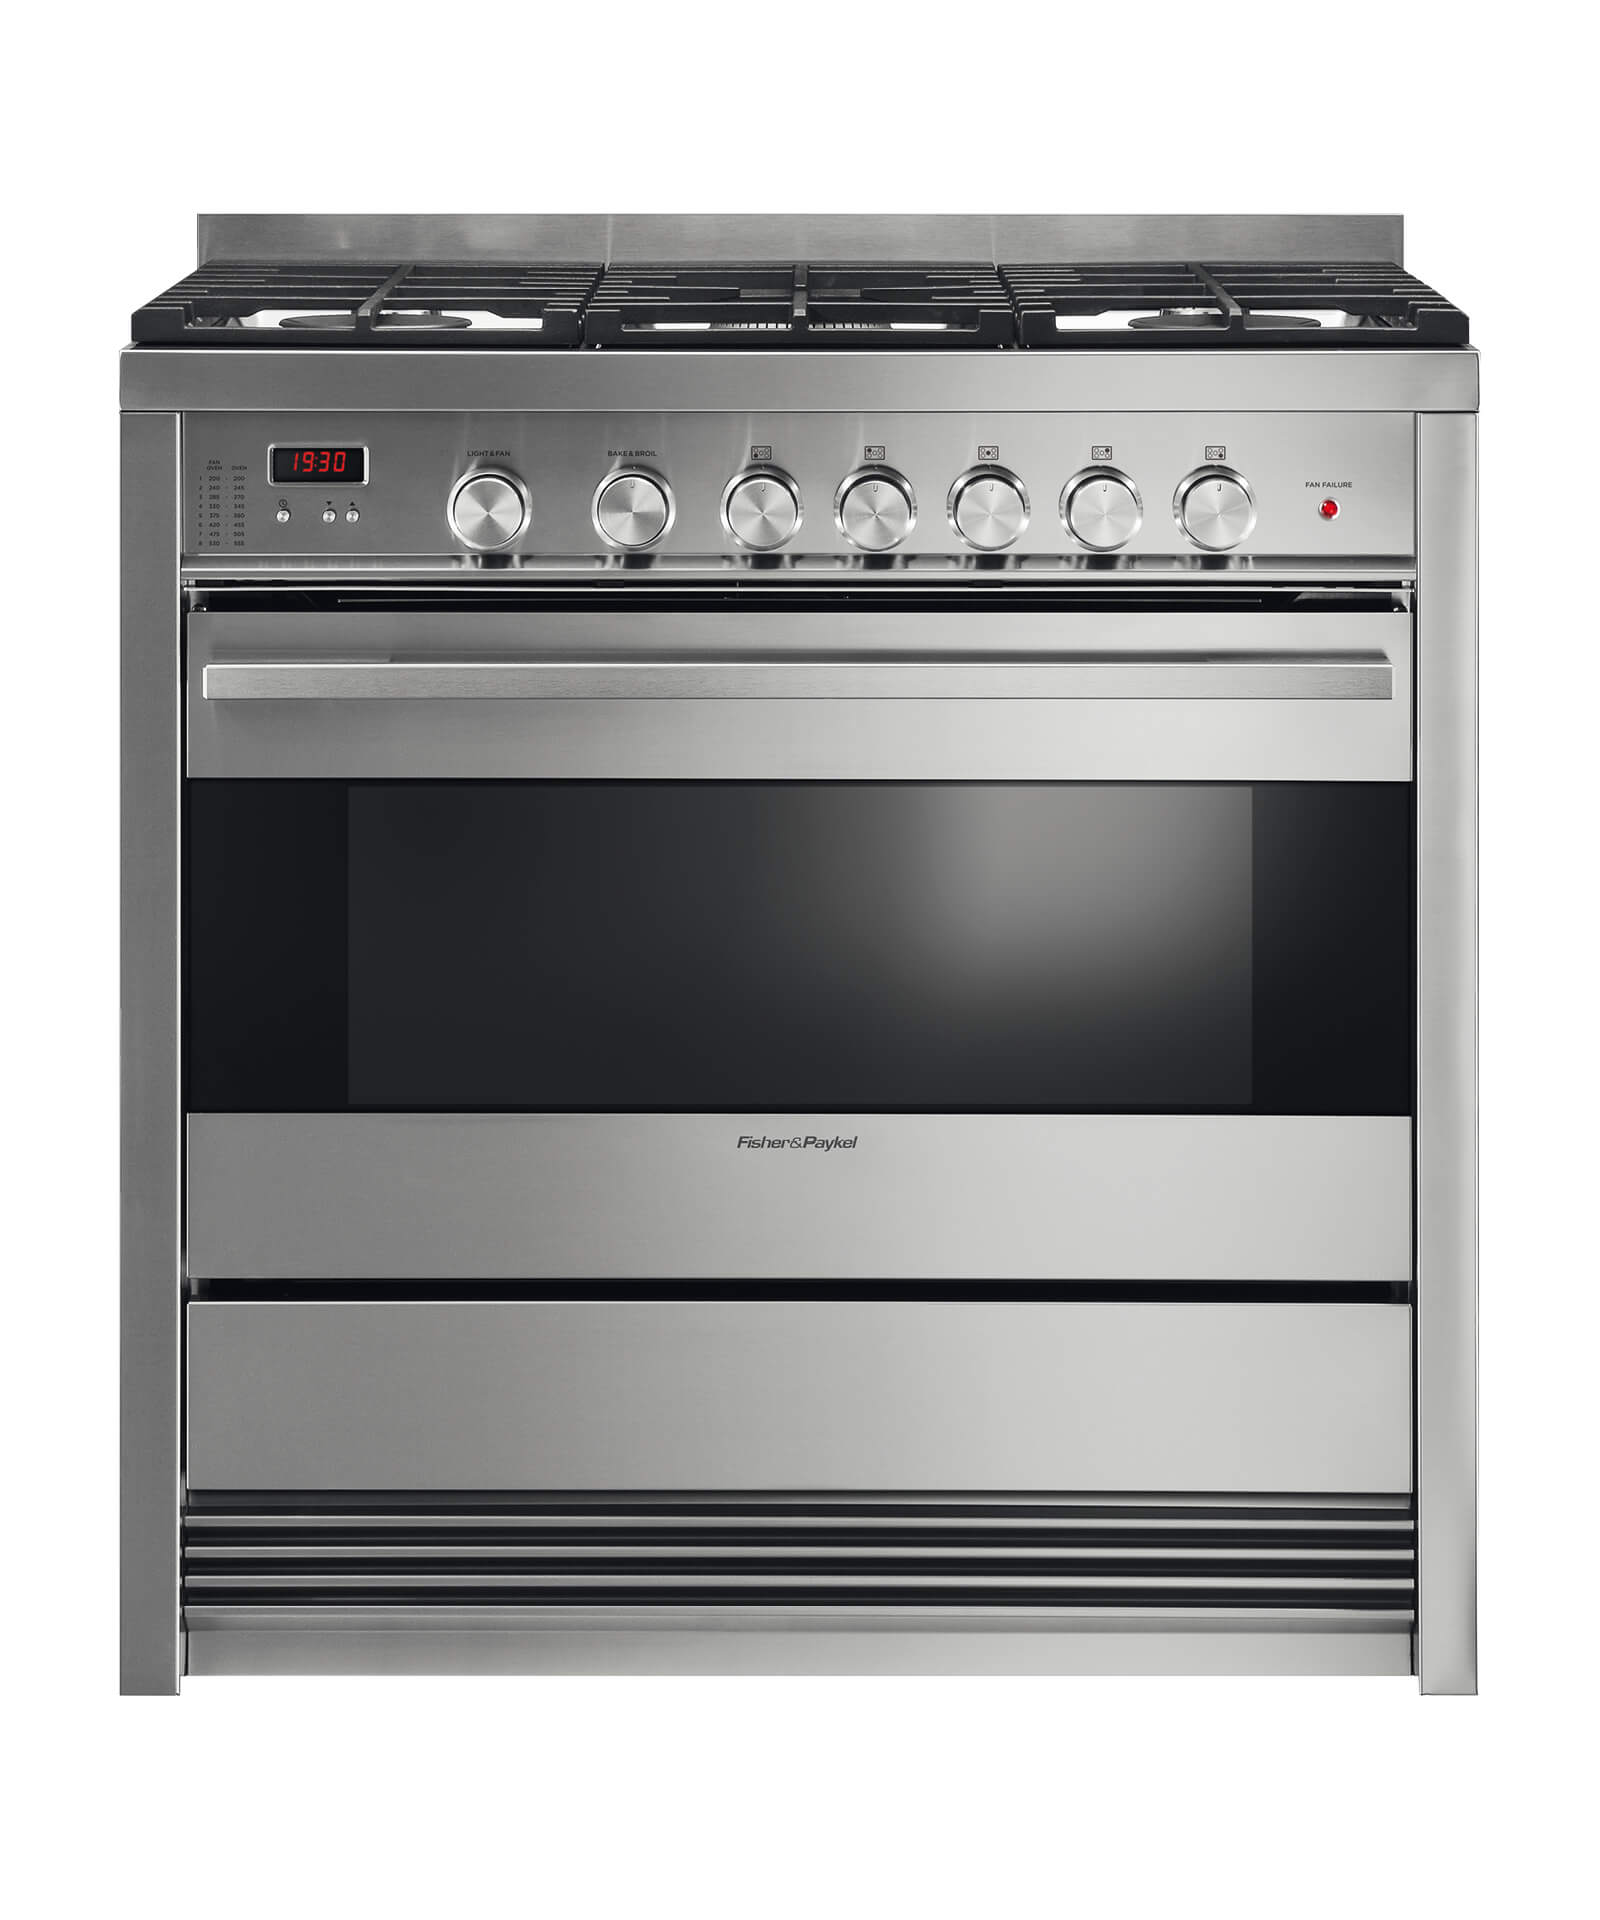 Kitchen ranges for cooking - Fisher & Paykel Appliances US - 36